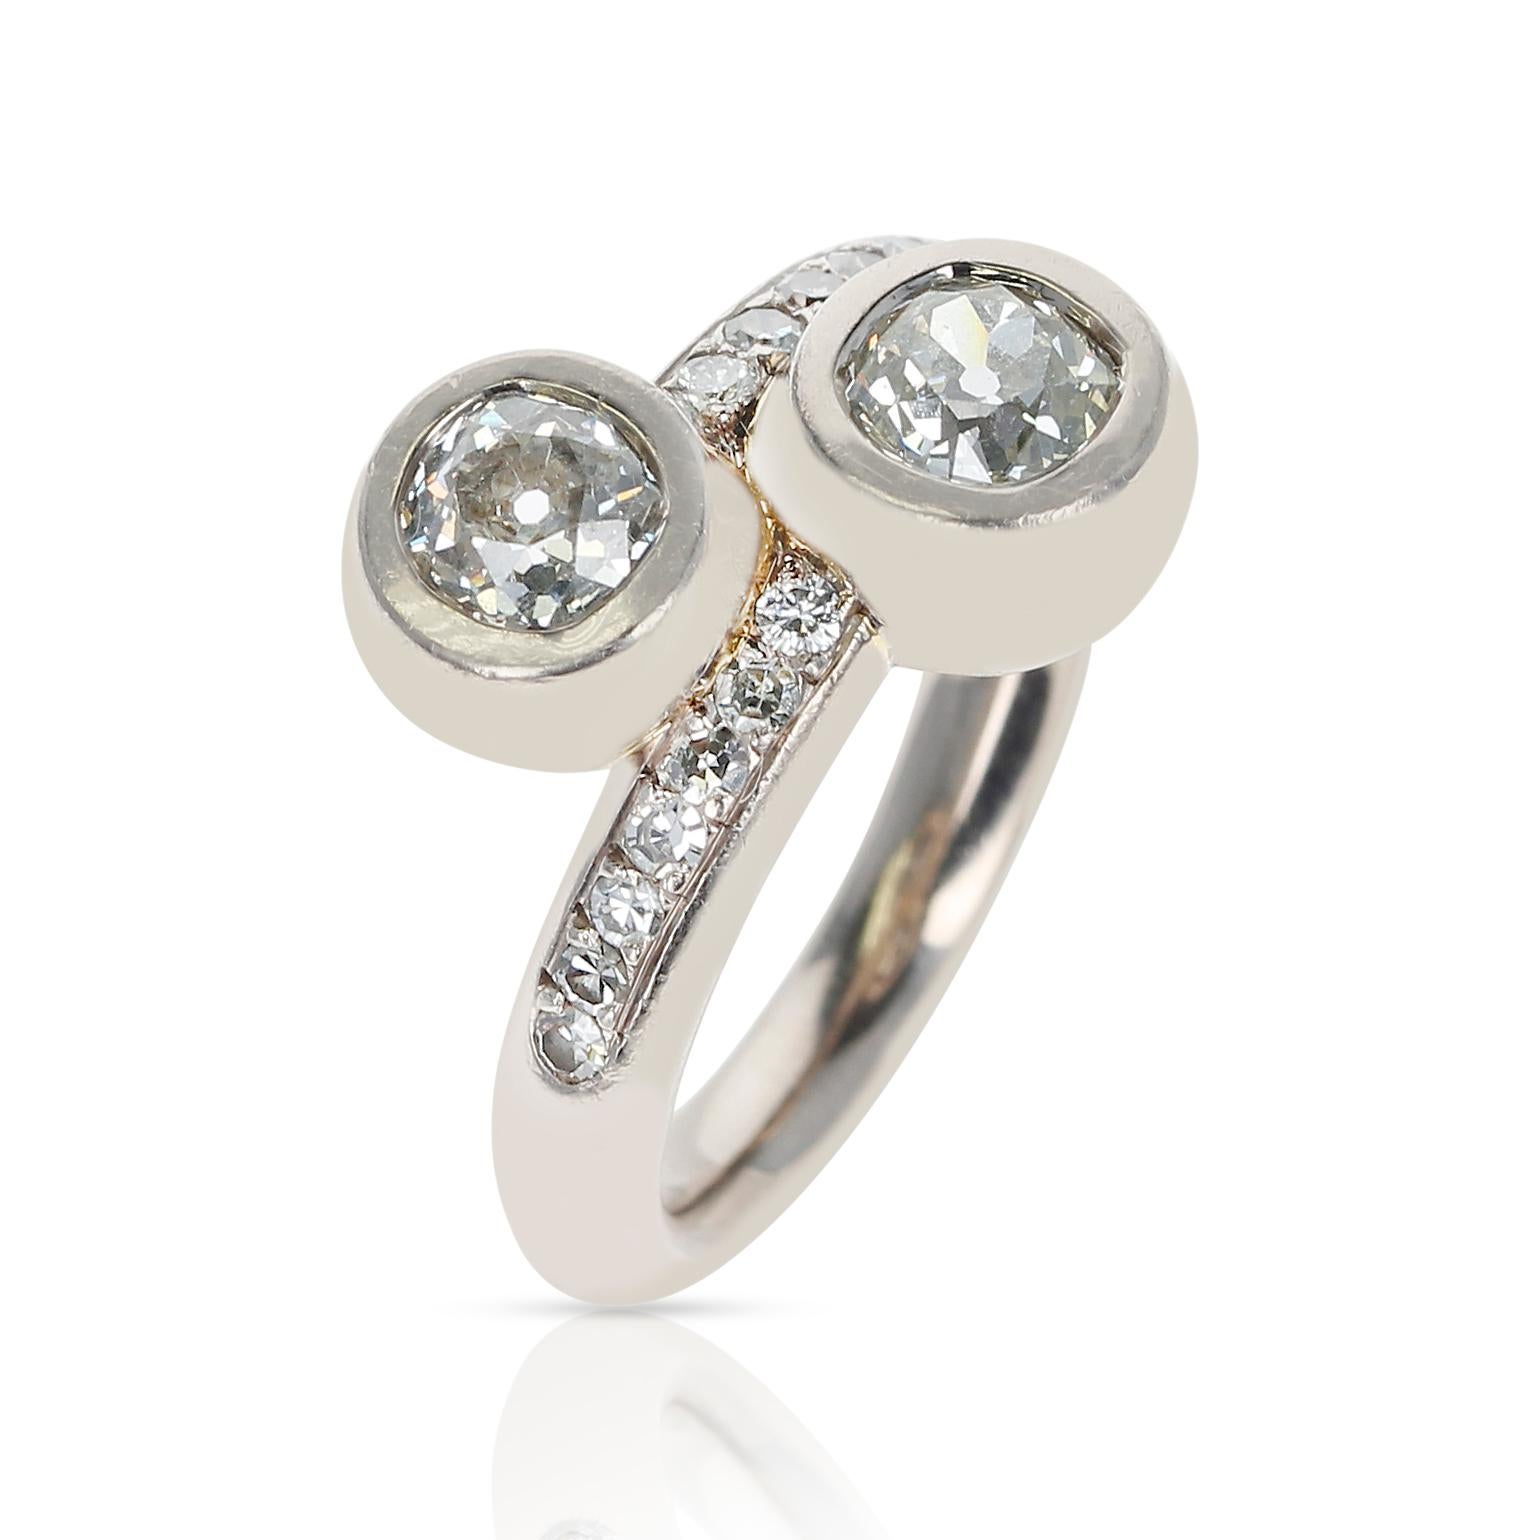 A 0.85 ct. each Two Round Diamonds Toi et Moi Ring. Ring Size US 8. Total Weight: 14.40 grams. The approximate color of the diamonds are F/G and the approximate clarity is VS1. 
